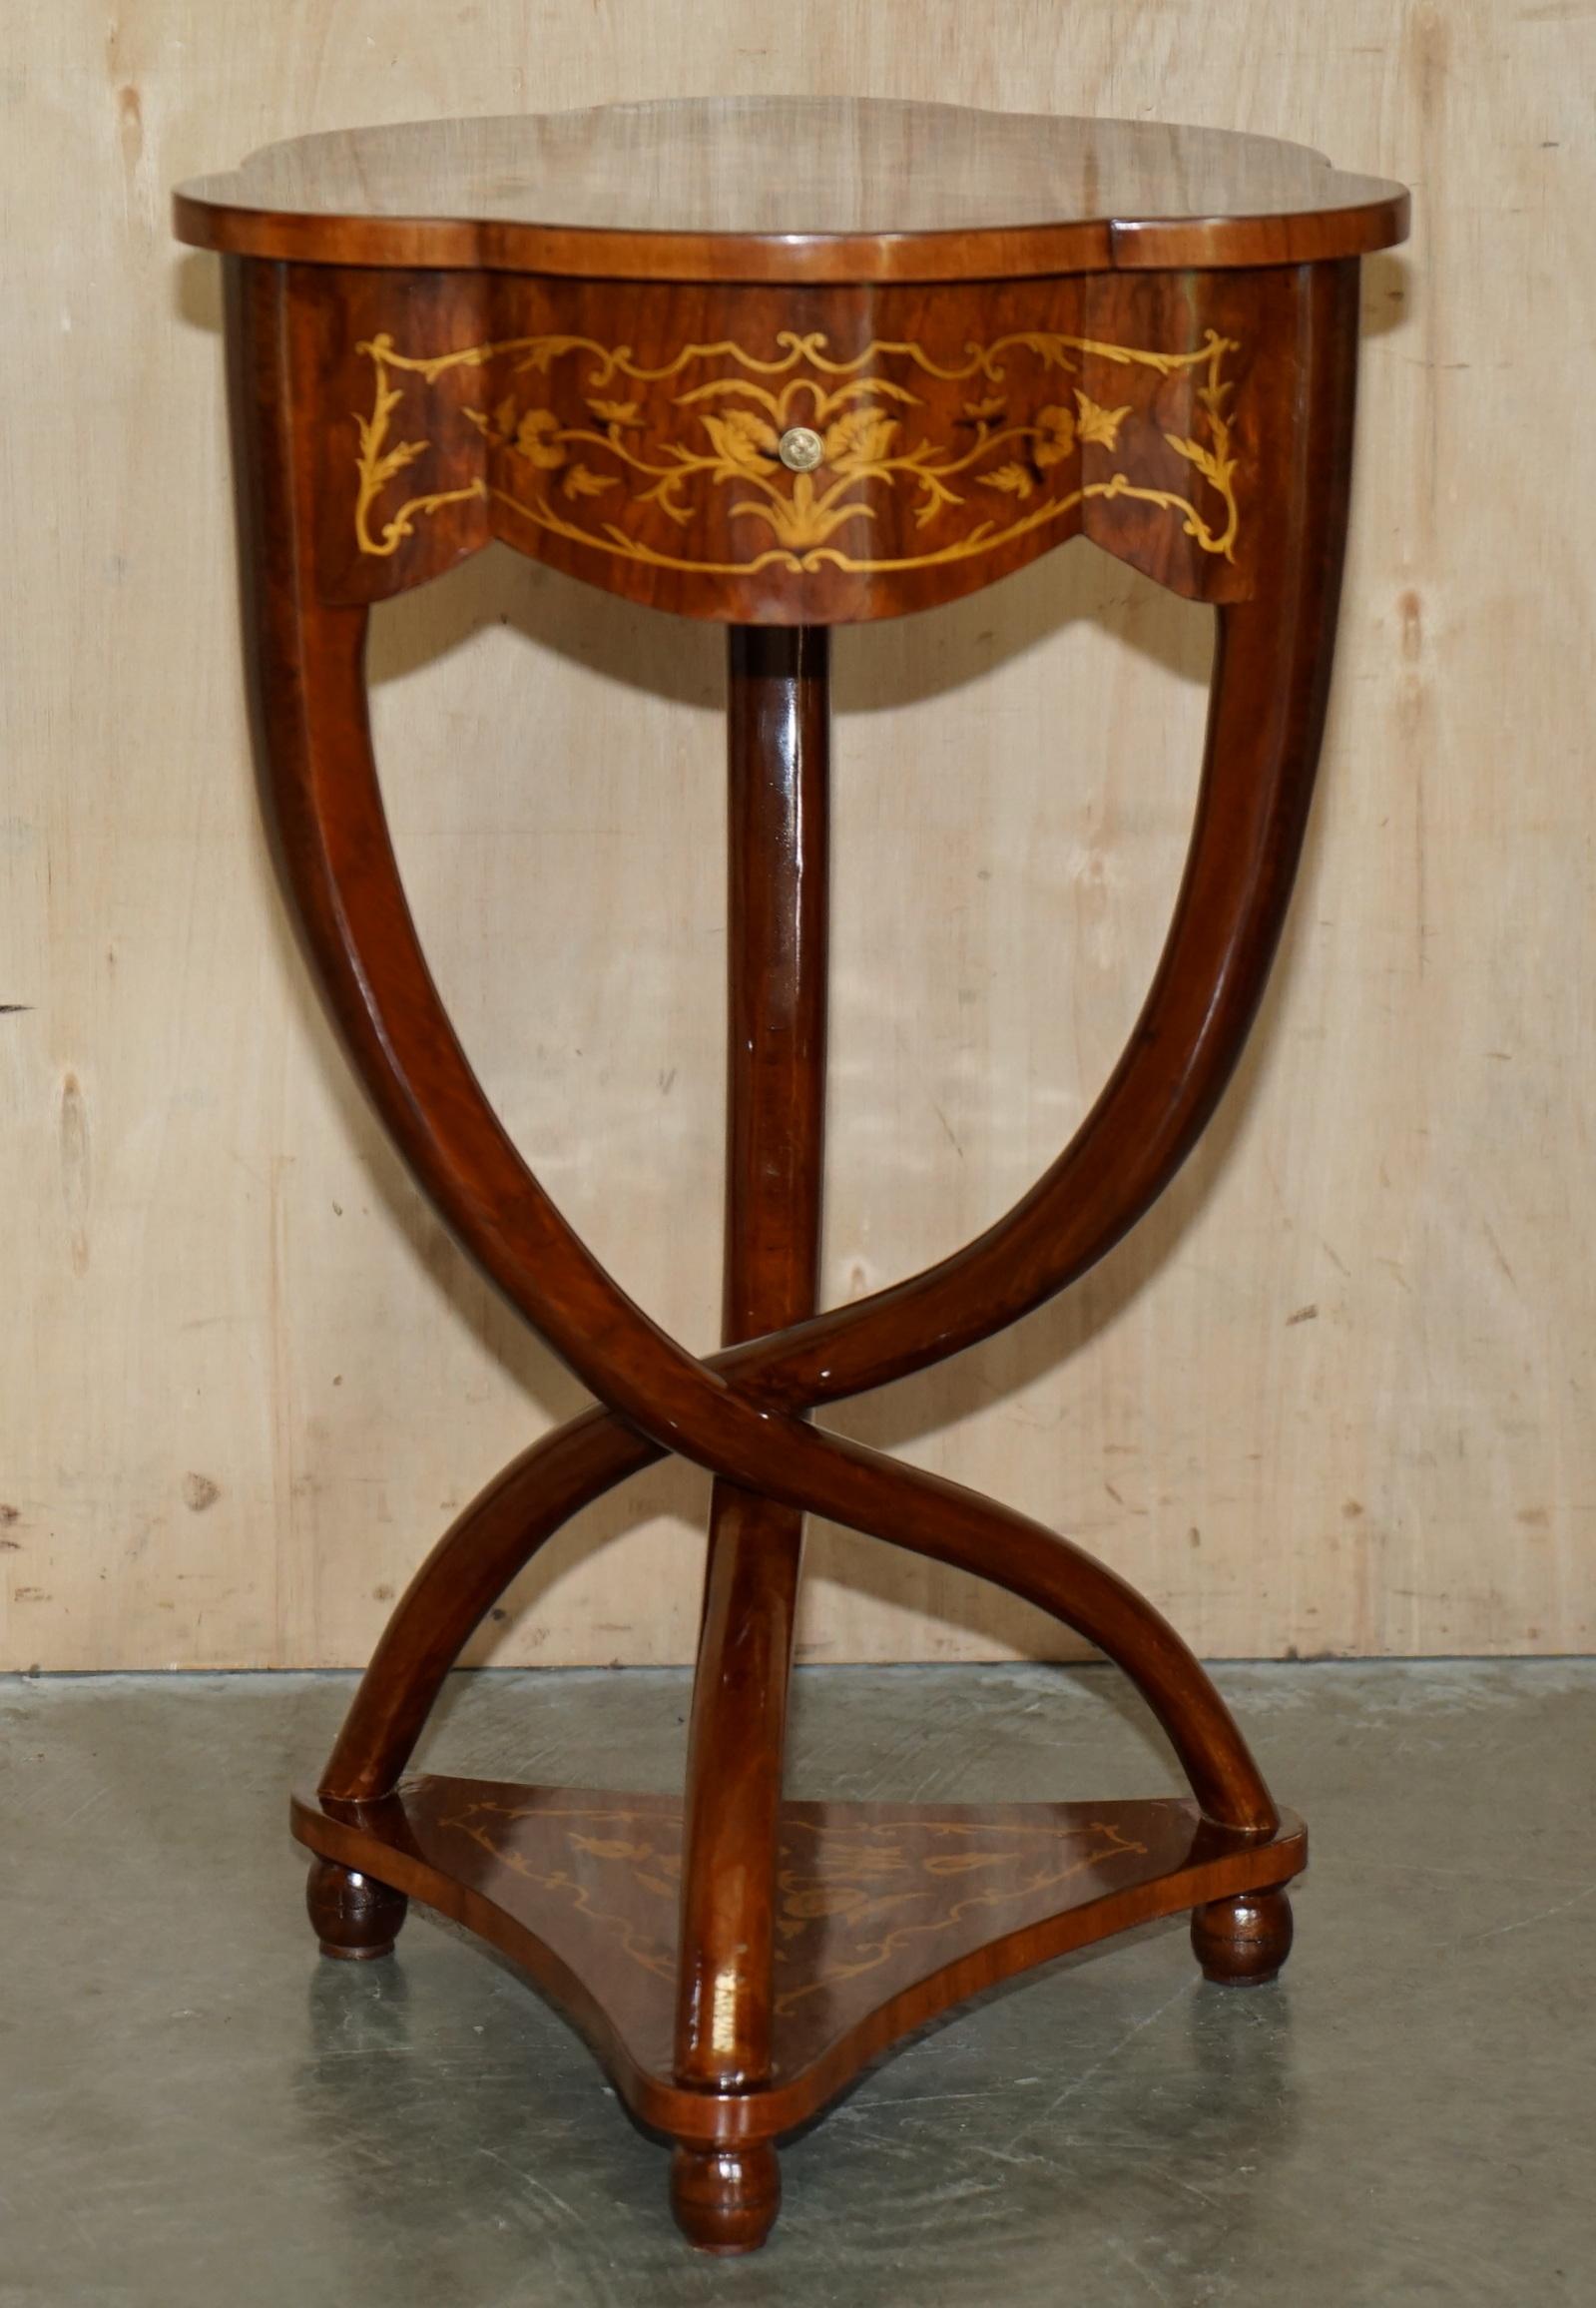 Art Deco PAIR OF ART DECO STYLE SYCAMORE WOOD & WALNUT INLAID PEDESTAL SIDE END TABLEs For Sale